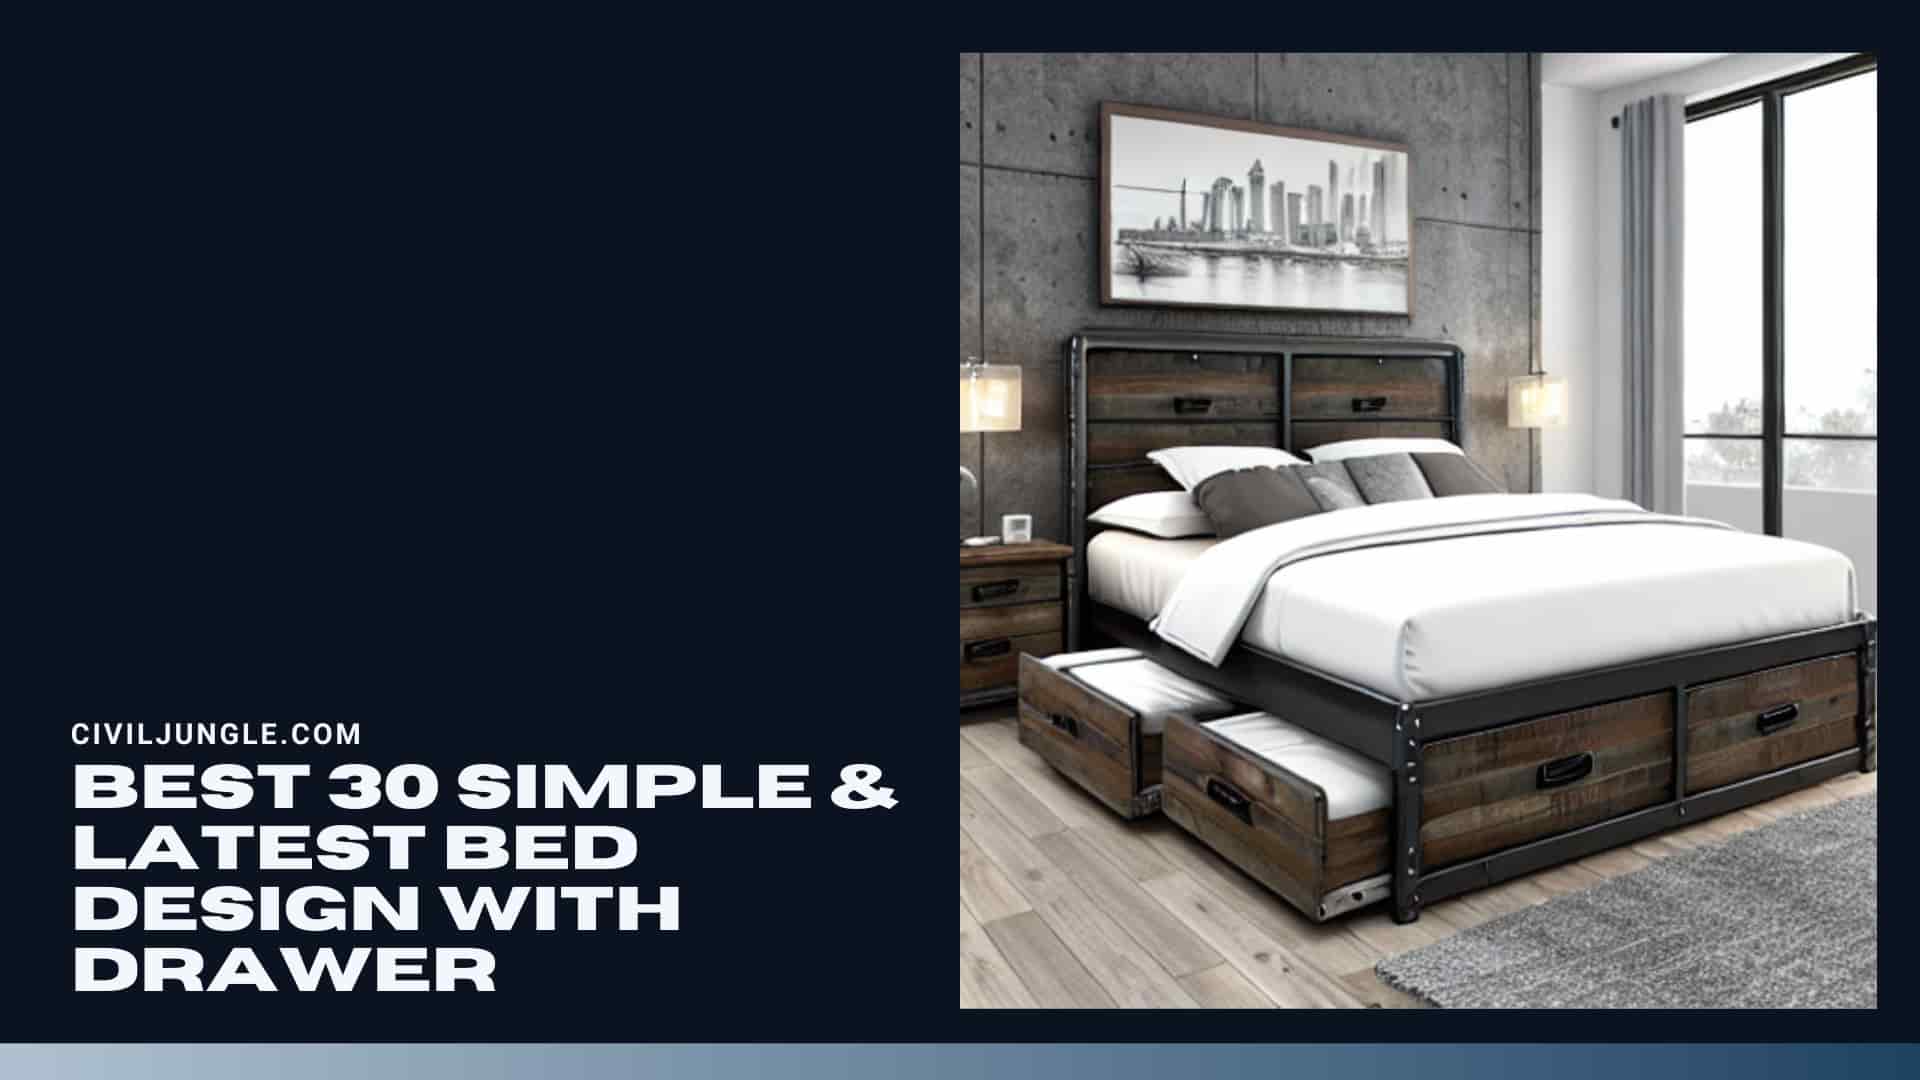 Best 30 Simple & Latest Bed Design with Drawer